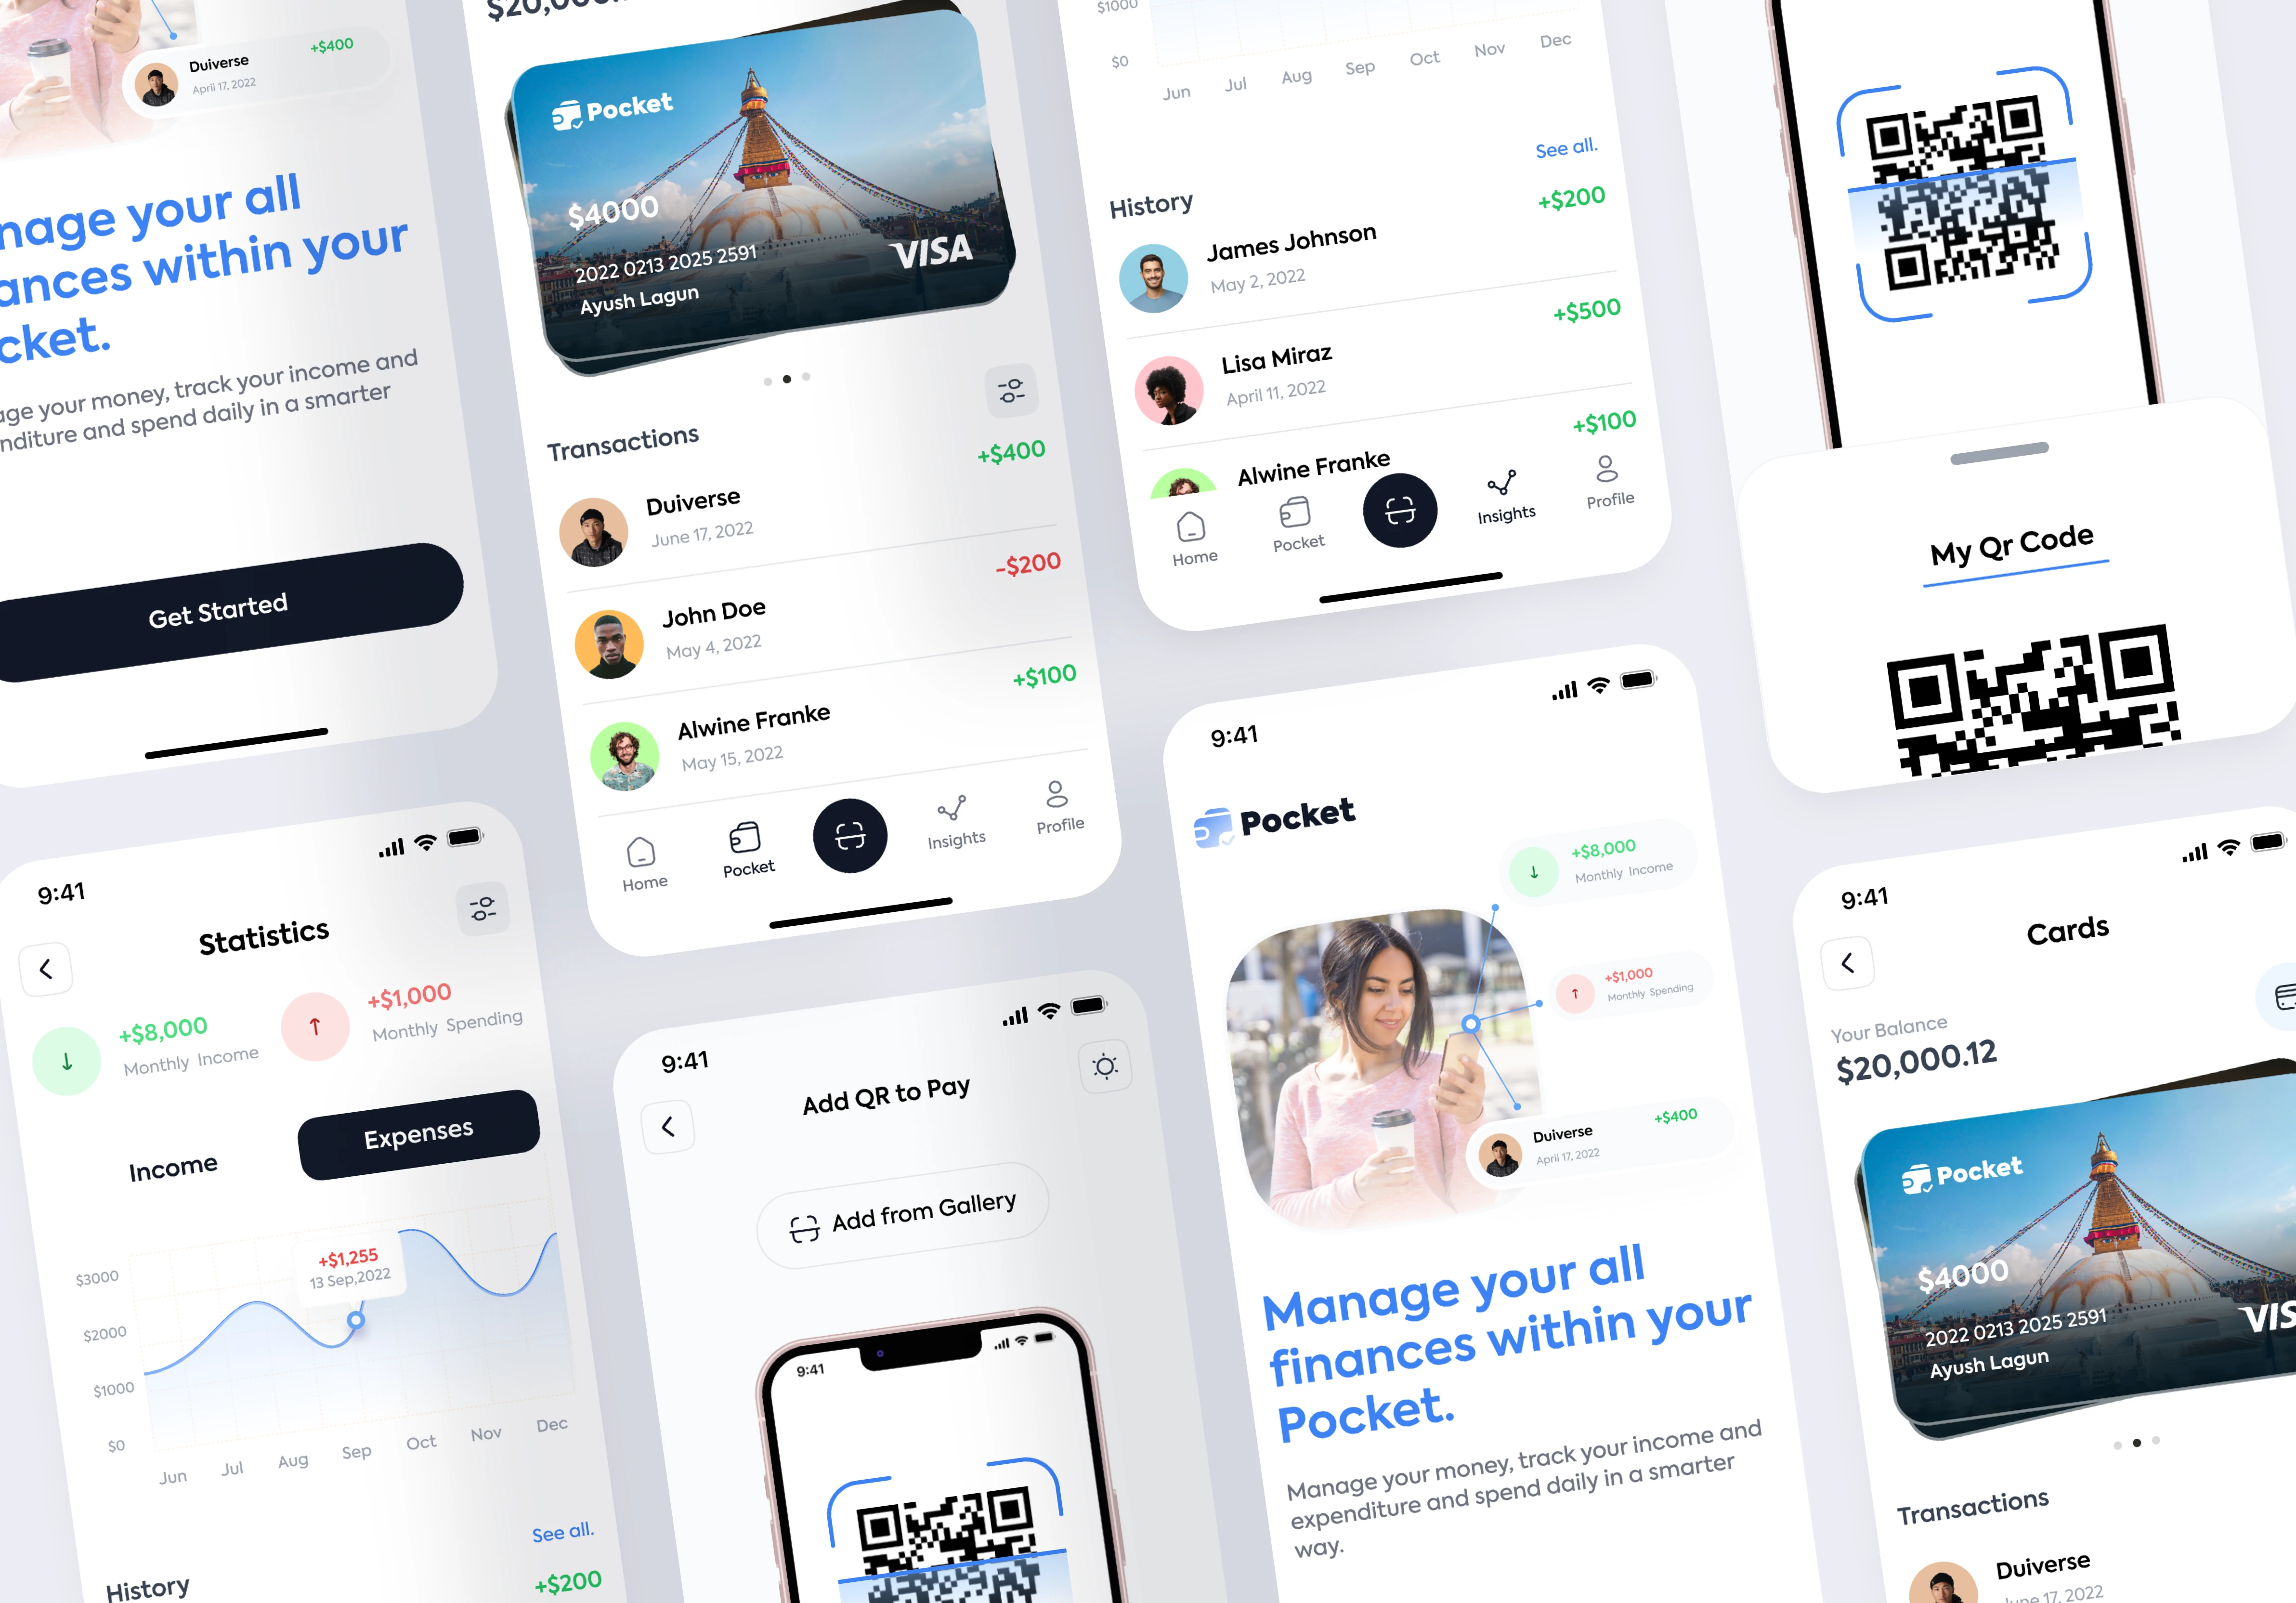 budgeting app design by duiverse